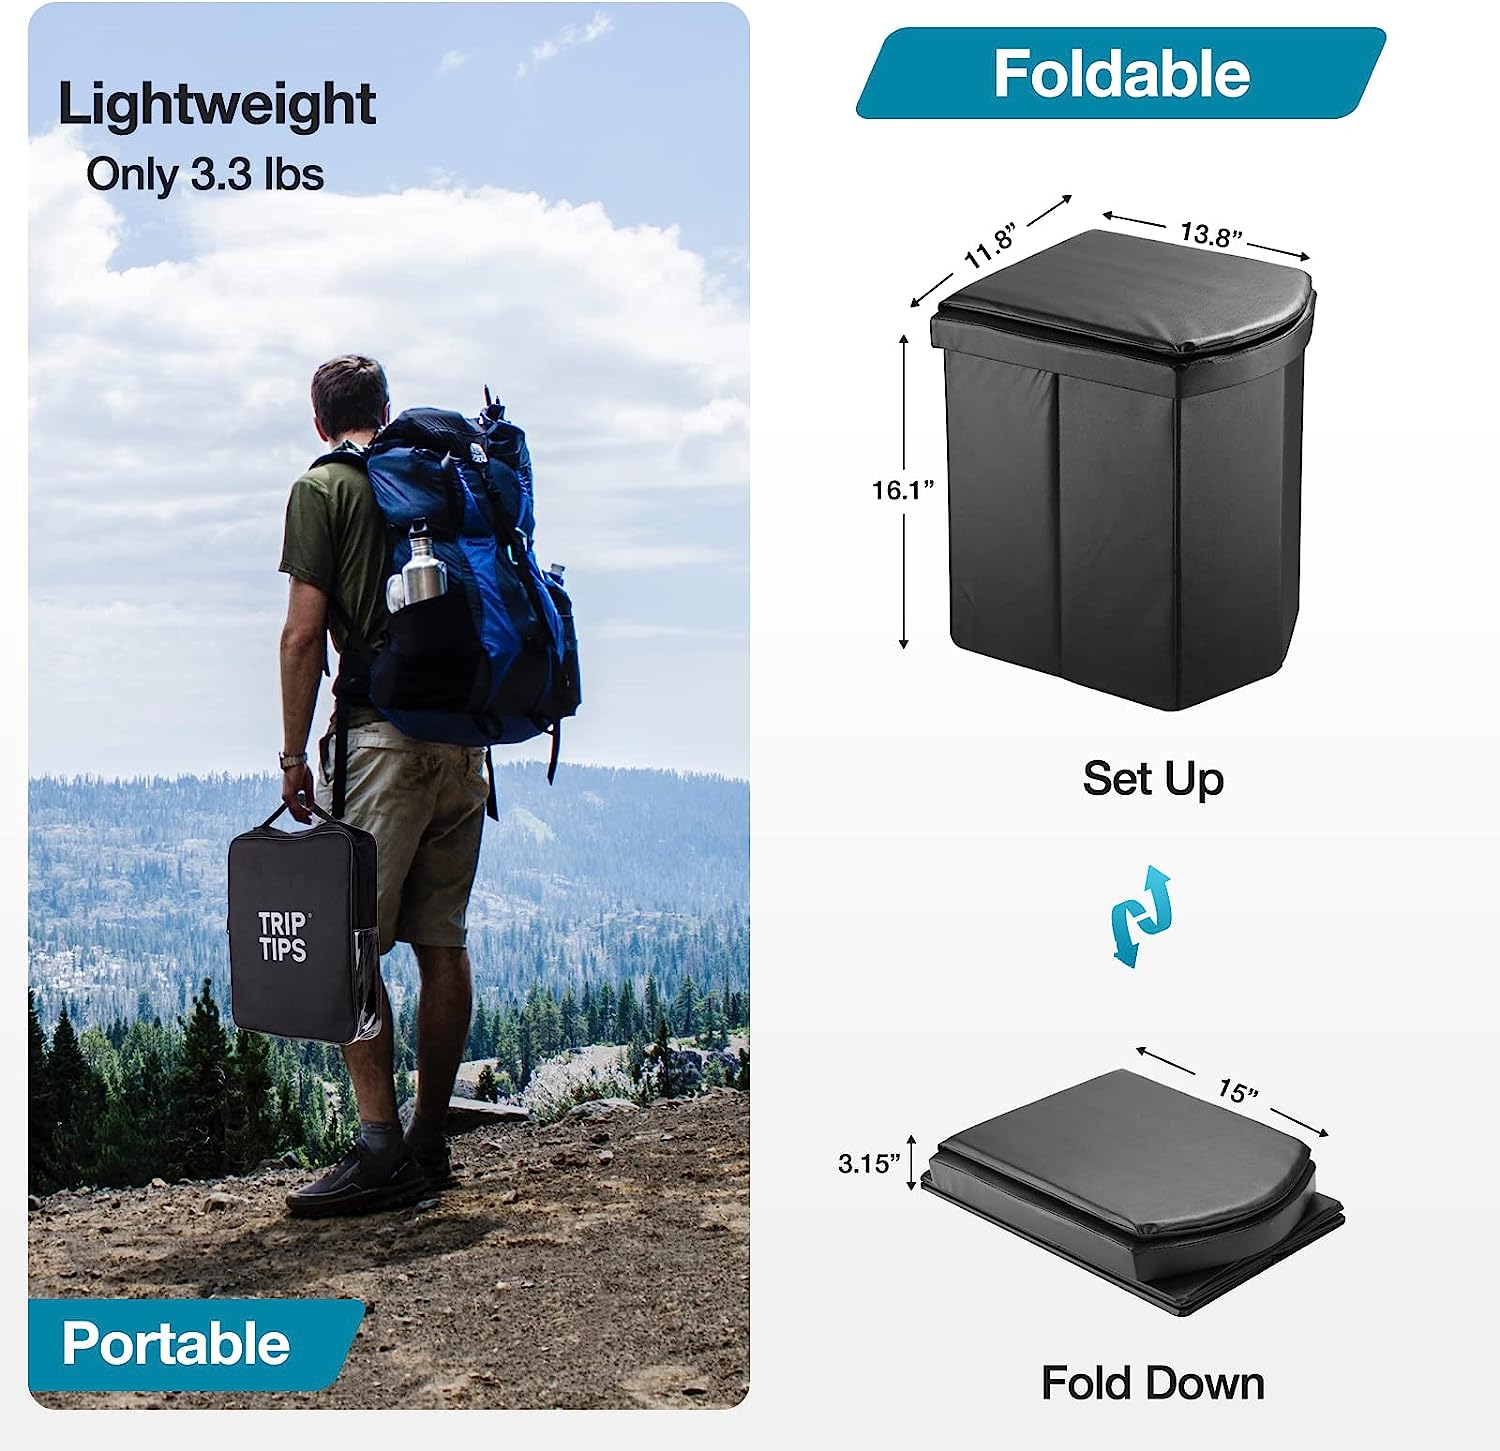 TRIPTIPS Upgrade XL Portable Toilet for Camping Camping Toilets Tall Portable Toilet for Adults and Kids Folding Toilet for Car/Boat/Hiking